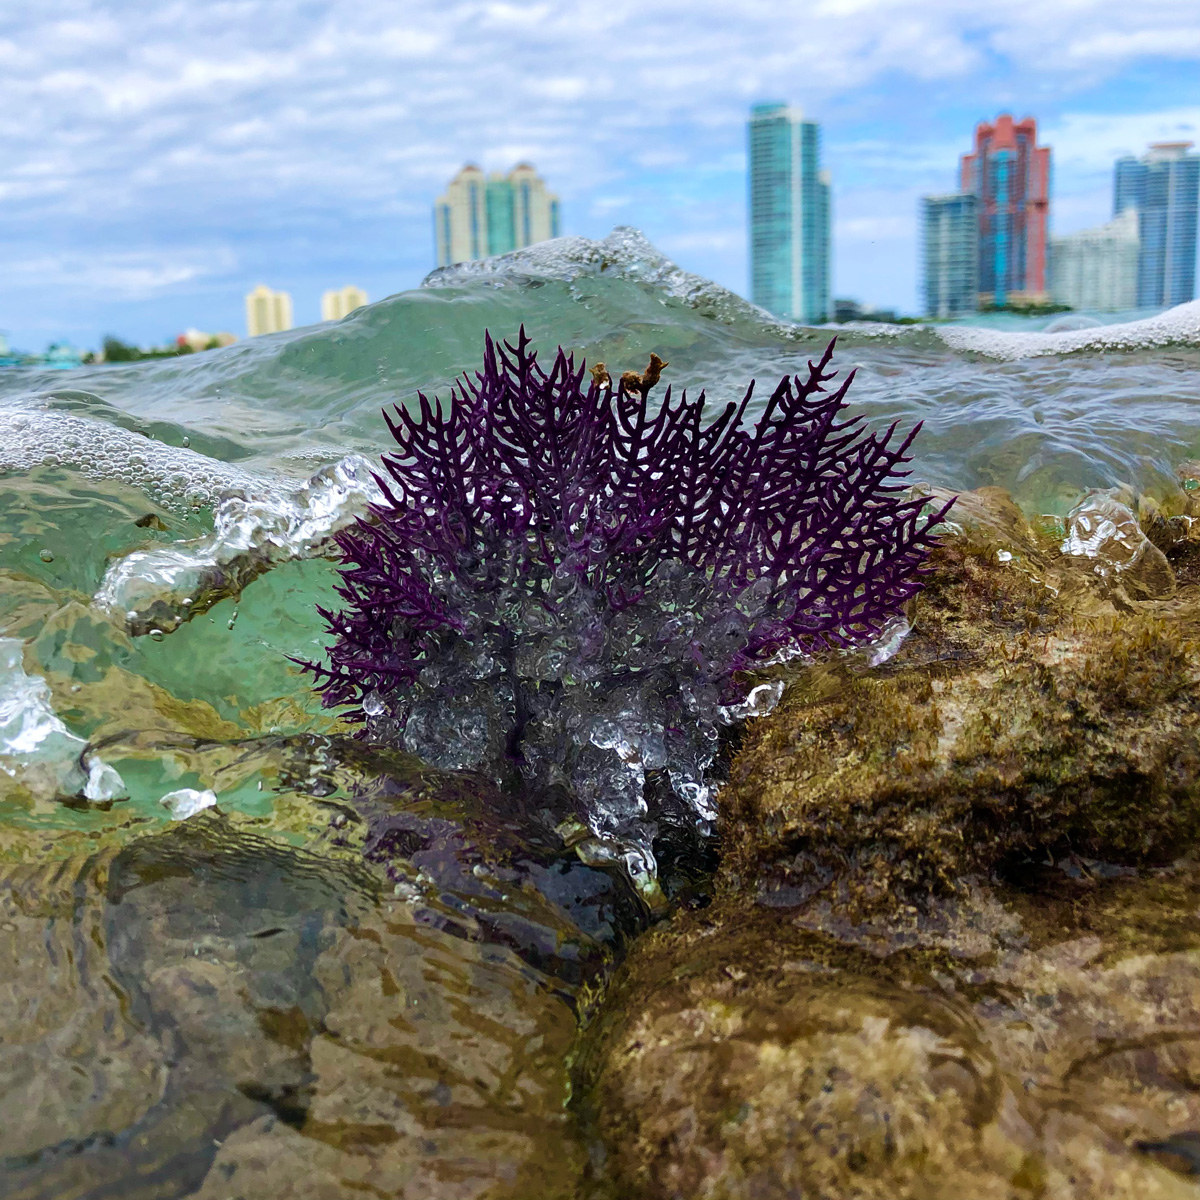 Square color image of a purple fan coral (Gorgonia ventalina) partially submerged in seawater as a small wave breaks over it. In the background is the Miami skyline with white moderate cloud cover over blue sky. A small wave is breaking through the fan coral and rocky substrate with algae is visible in the bottom third of the frame. Image used to highlight the resilience of these species in an urban and largely disrupted ecosystem.